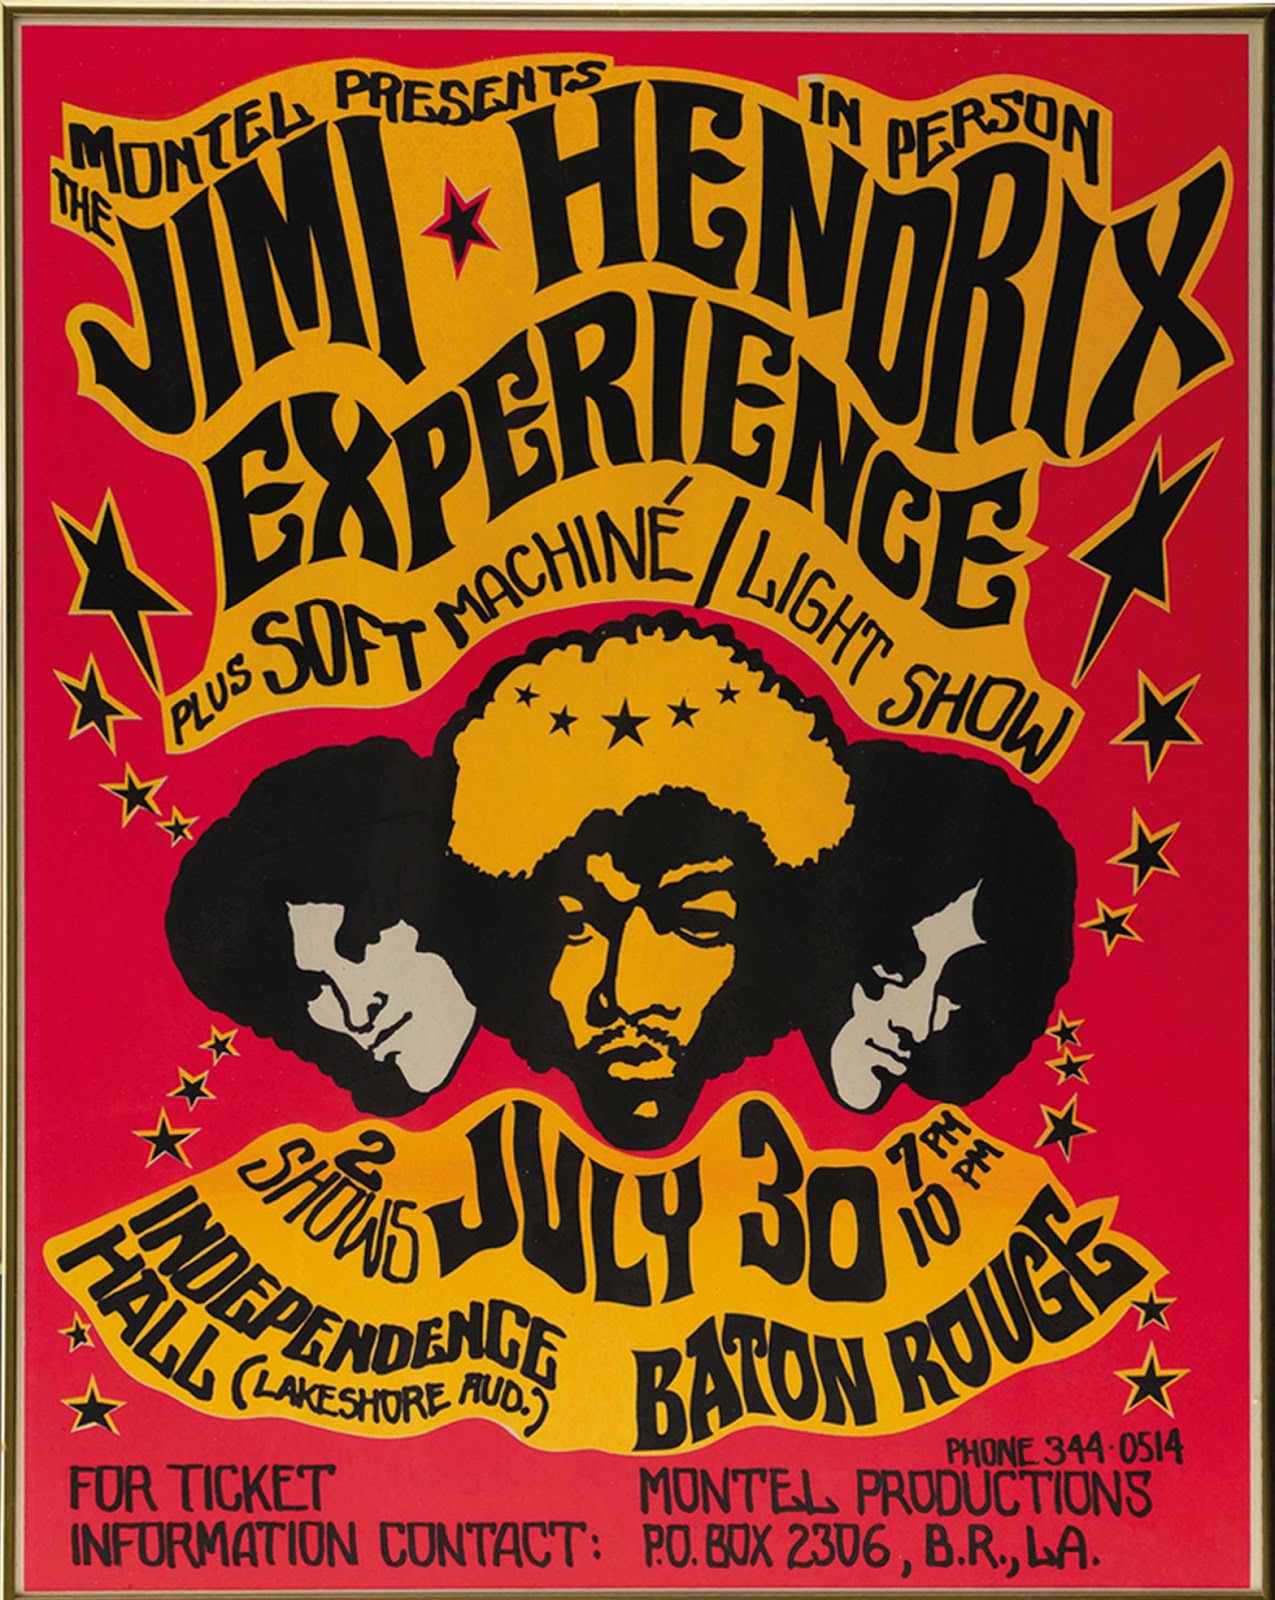 20 Classic Vintage Psychedelic Rock Posters from the 60s